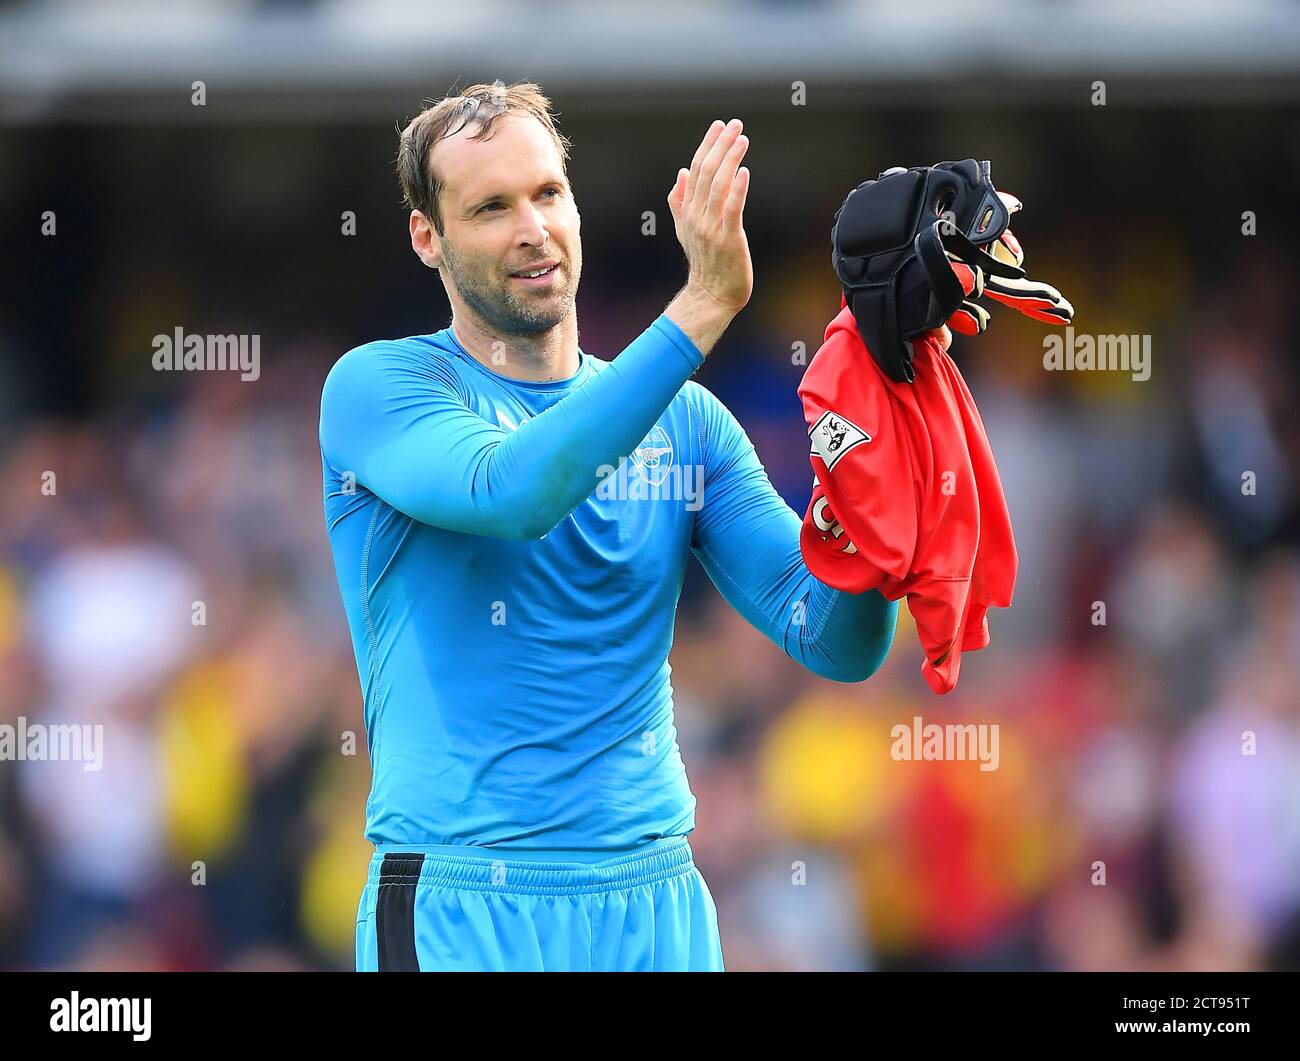 PETR CECH APPLAUDS THE ARSENAL FANS AT THE FINAL WHISTLE  Watford v Arsenal Premier League - Vicarage Road  Copyright Picture : Mark Pain 27/08/2016 Stock Photo